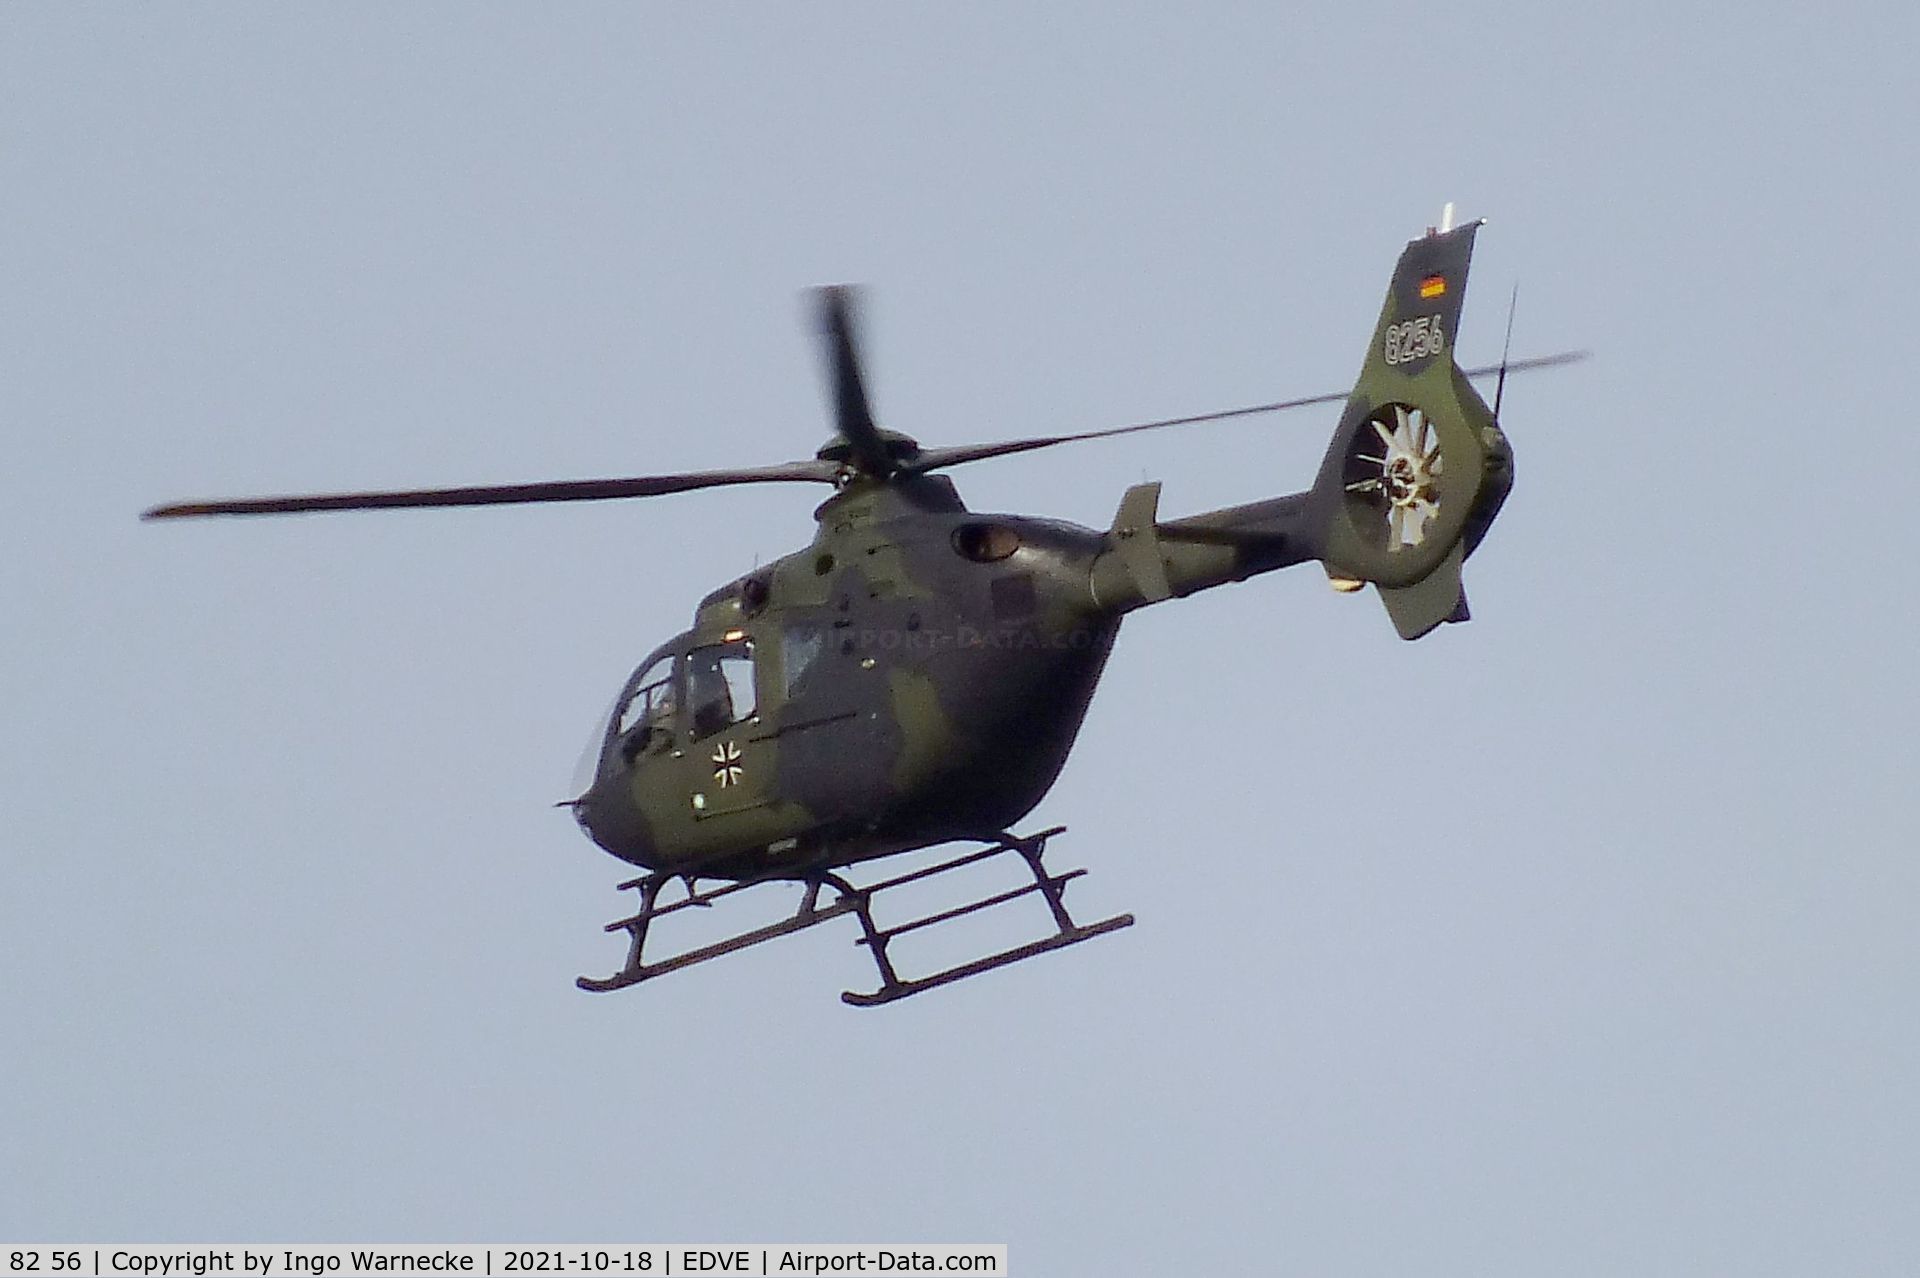 82 56, 2000 Eurocopter EC-135T-1 C/N 0104, Eurocopter EC135T-1 of the Bundeswehr passing by at Braunschweig-Wolfsburg airport, Waggum